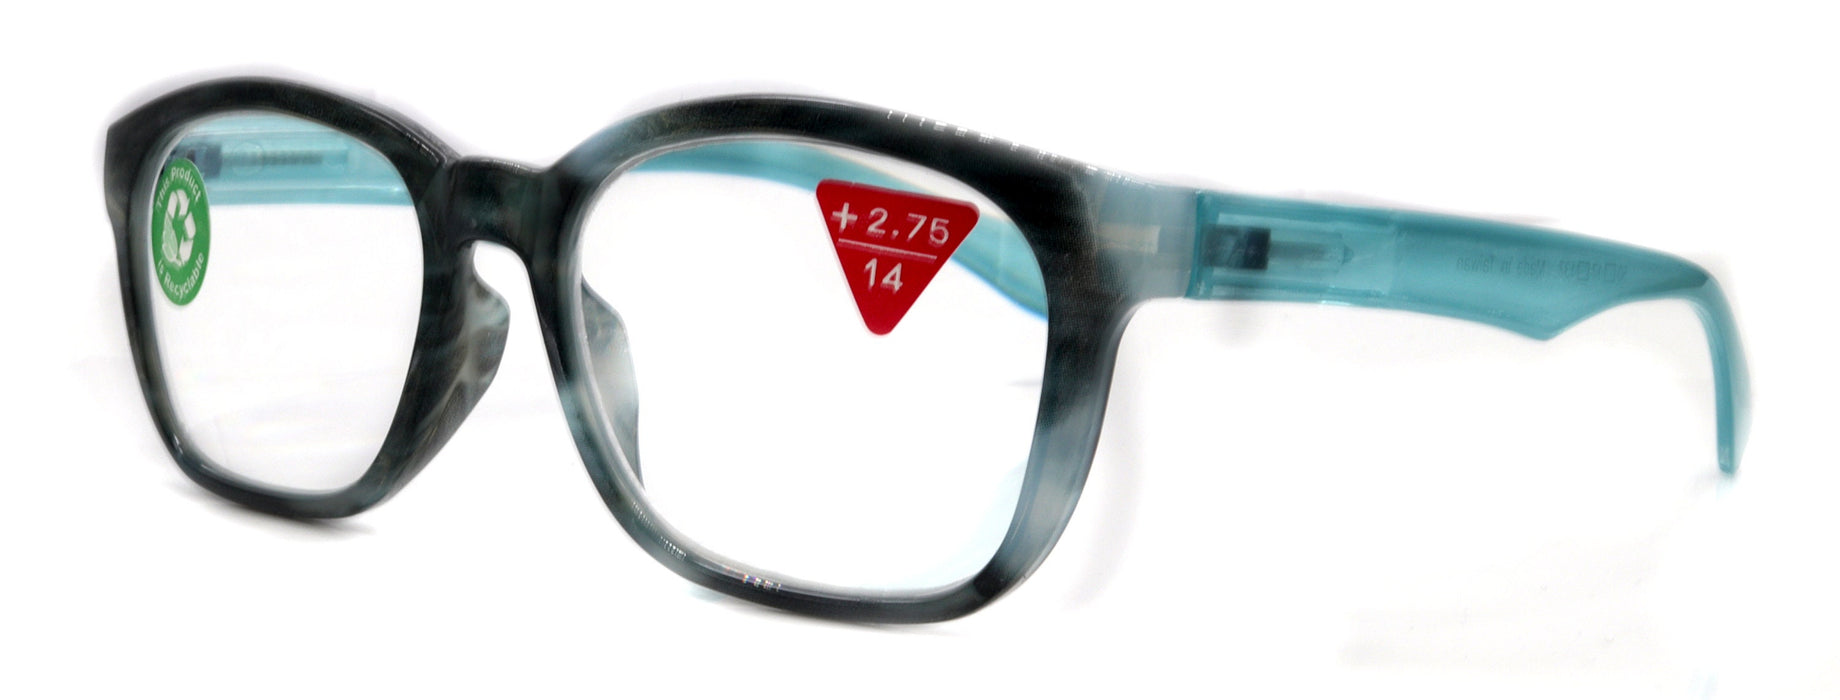 Coral, (Premium) Reading Glasses, High End Readers +1.25 to +3. Magnifying Glasses (Blue) Rectangular style. Optical Frame. NY Fifth Avenue.